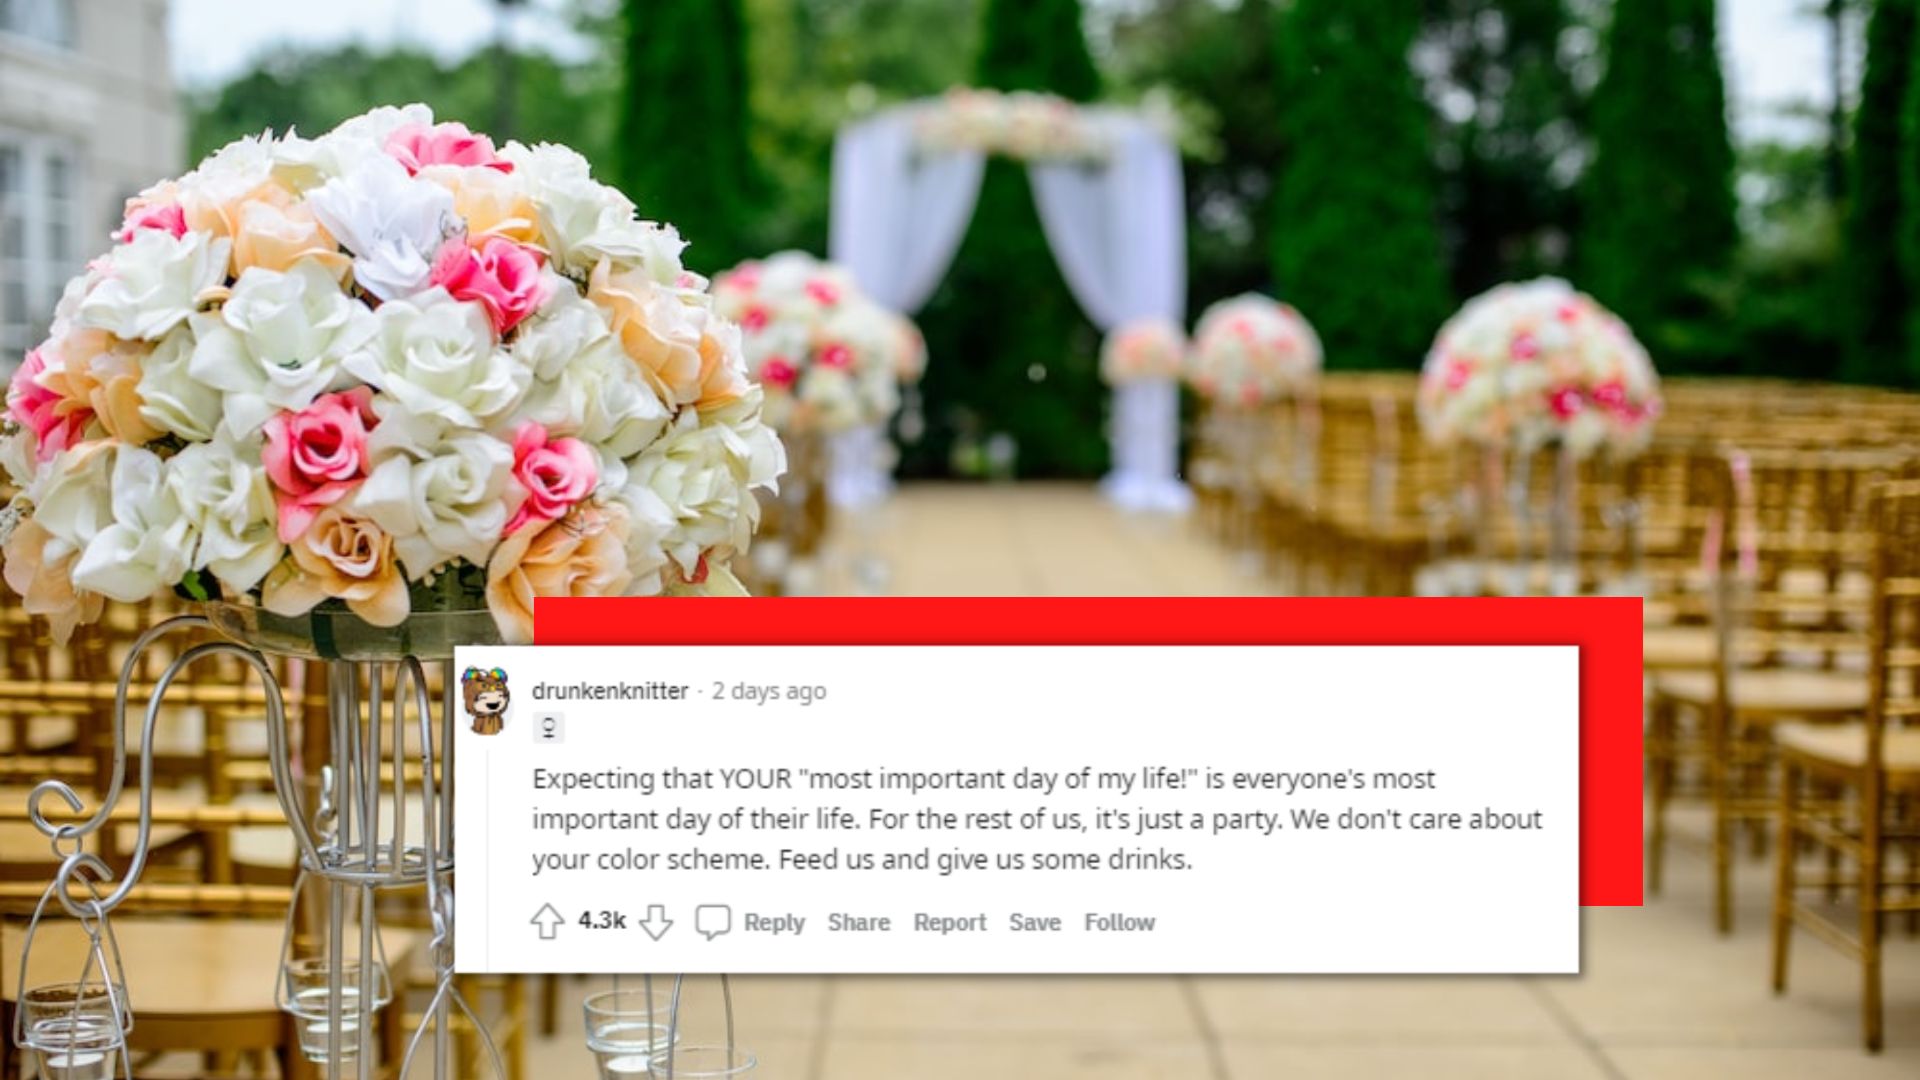 Redditors Speak Their Heart Out On The Do’s And Dont’s At A Wedding And You Might Agree With Most Of Them!